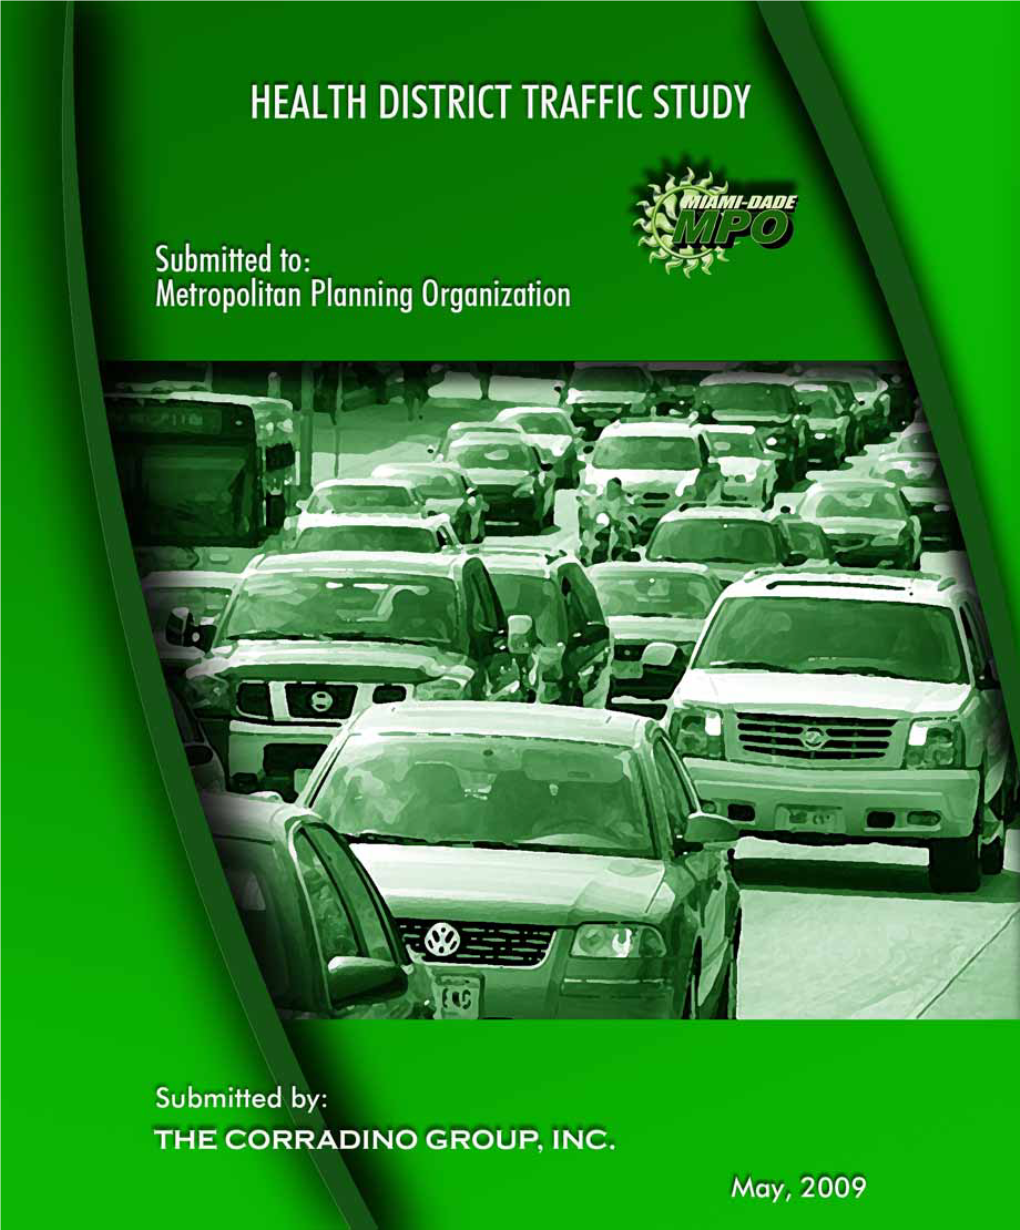 Health District Traffic Study Final Report, May 2009